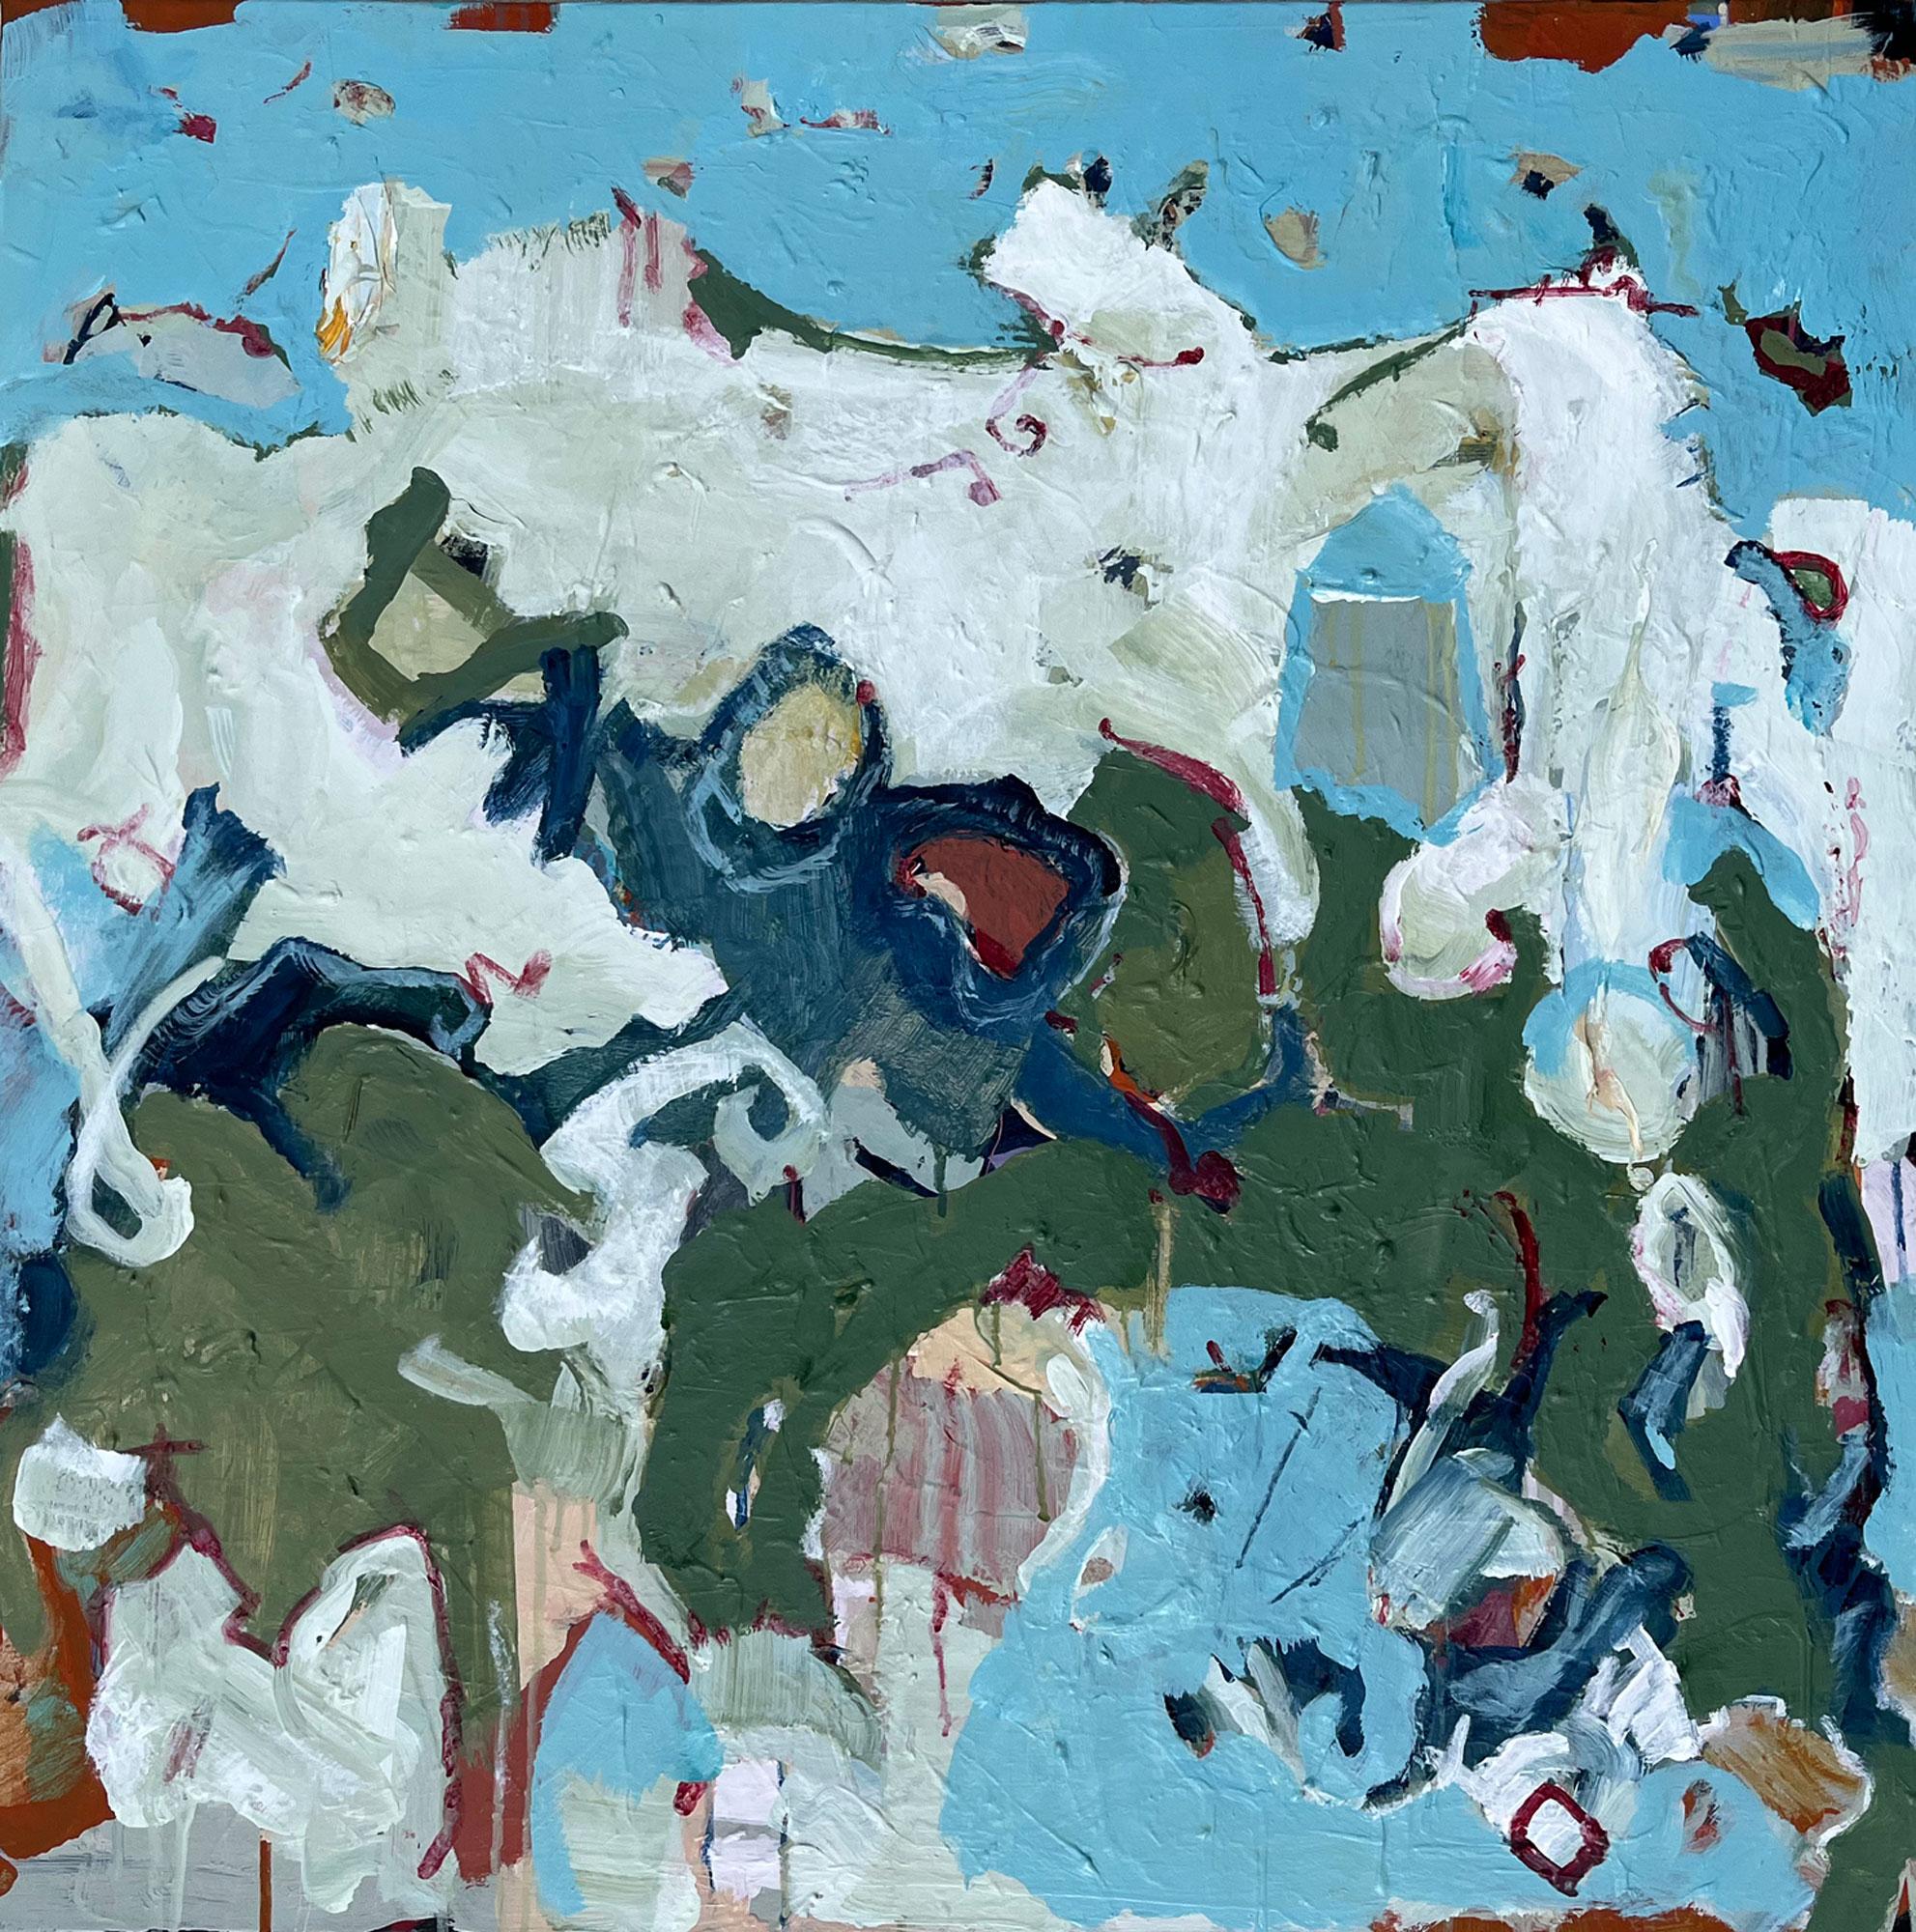 <p>Artist Comments<br>Artist Sheila Grabarsky shows a gestural abstract in intricate layers of acrylic paint and acrylic skins. She utilizes the dried paint, pulled from her palettes and adhered to the surface, as drawing elements and lines. "The